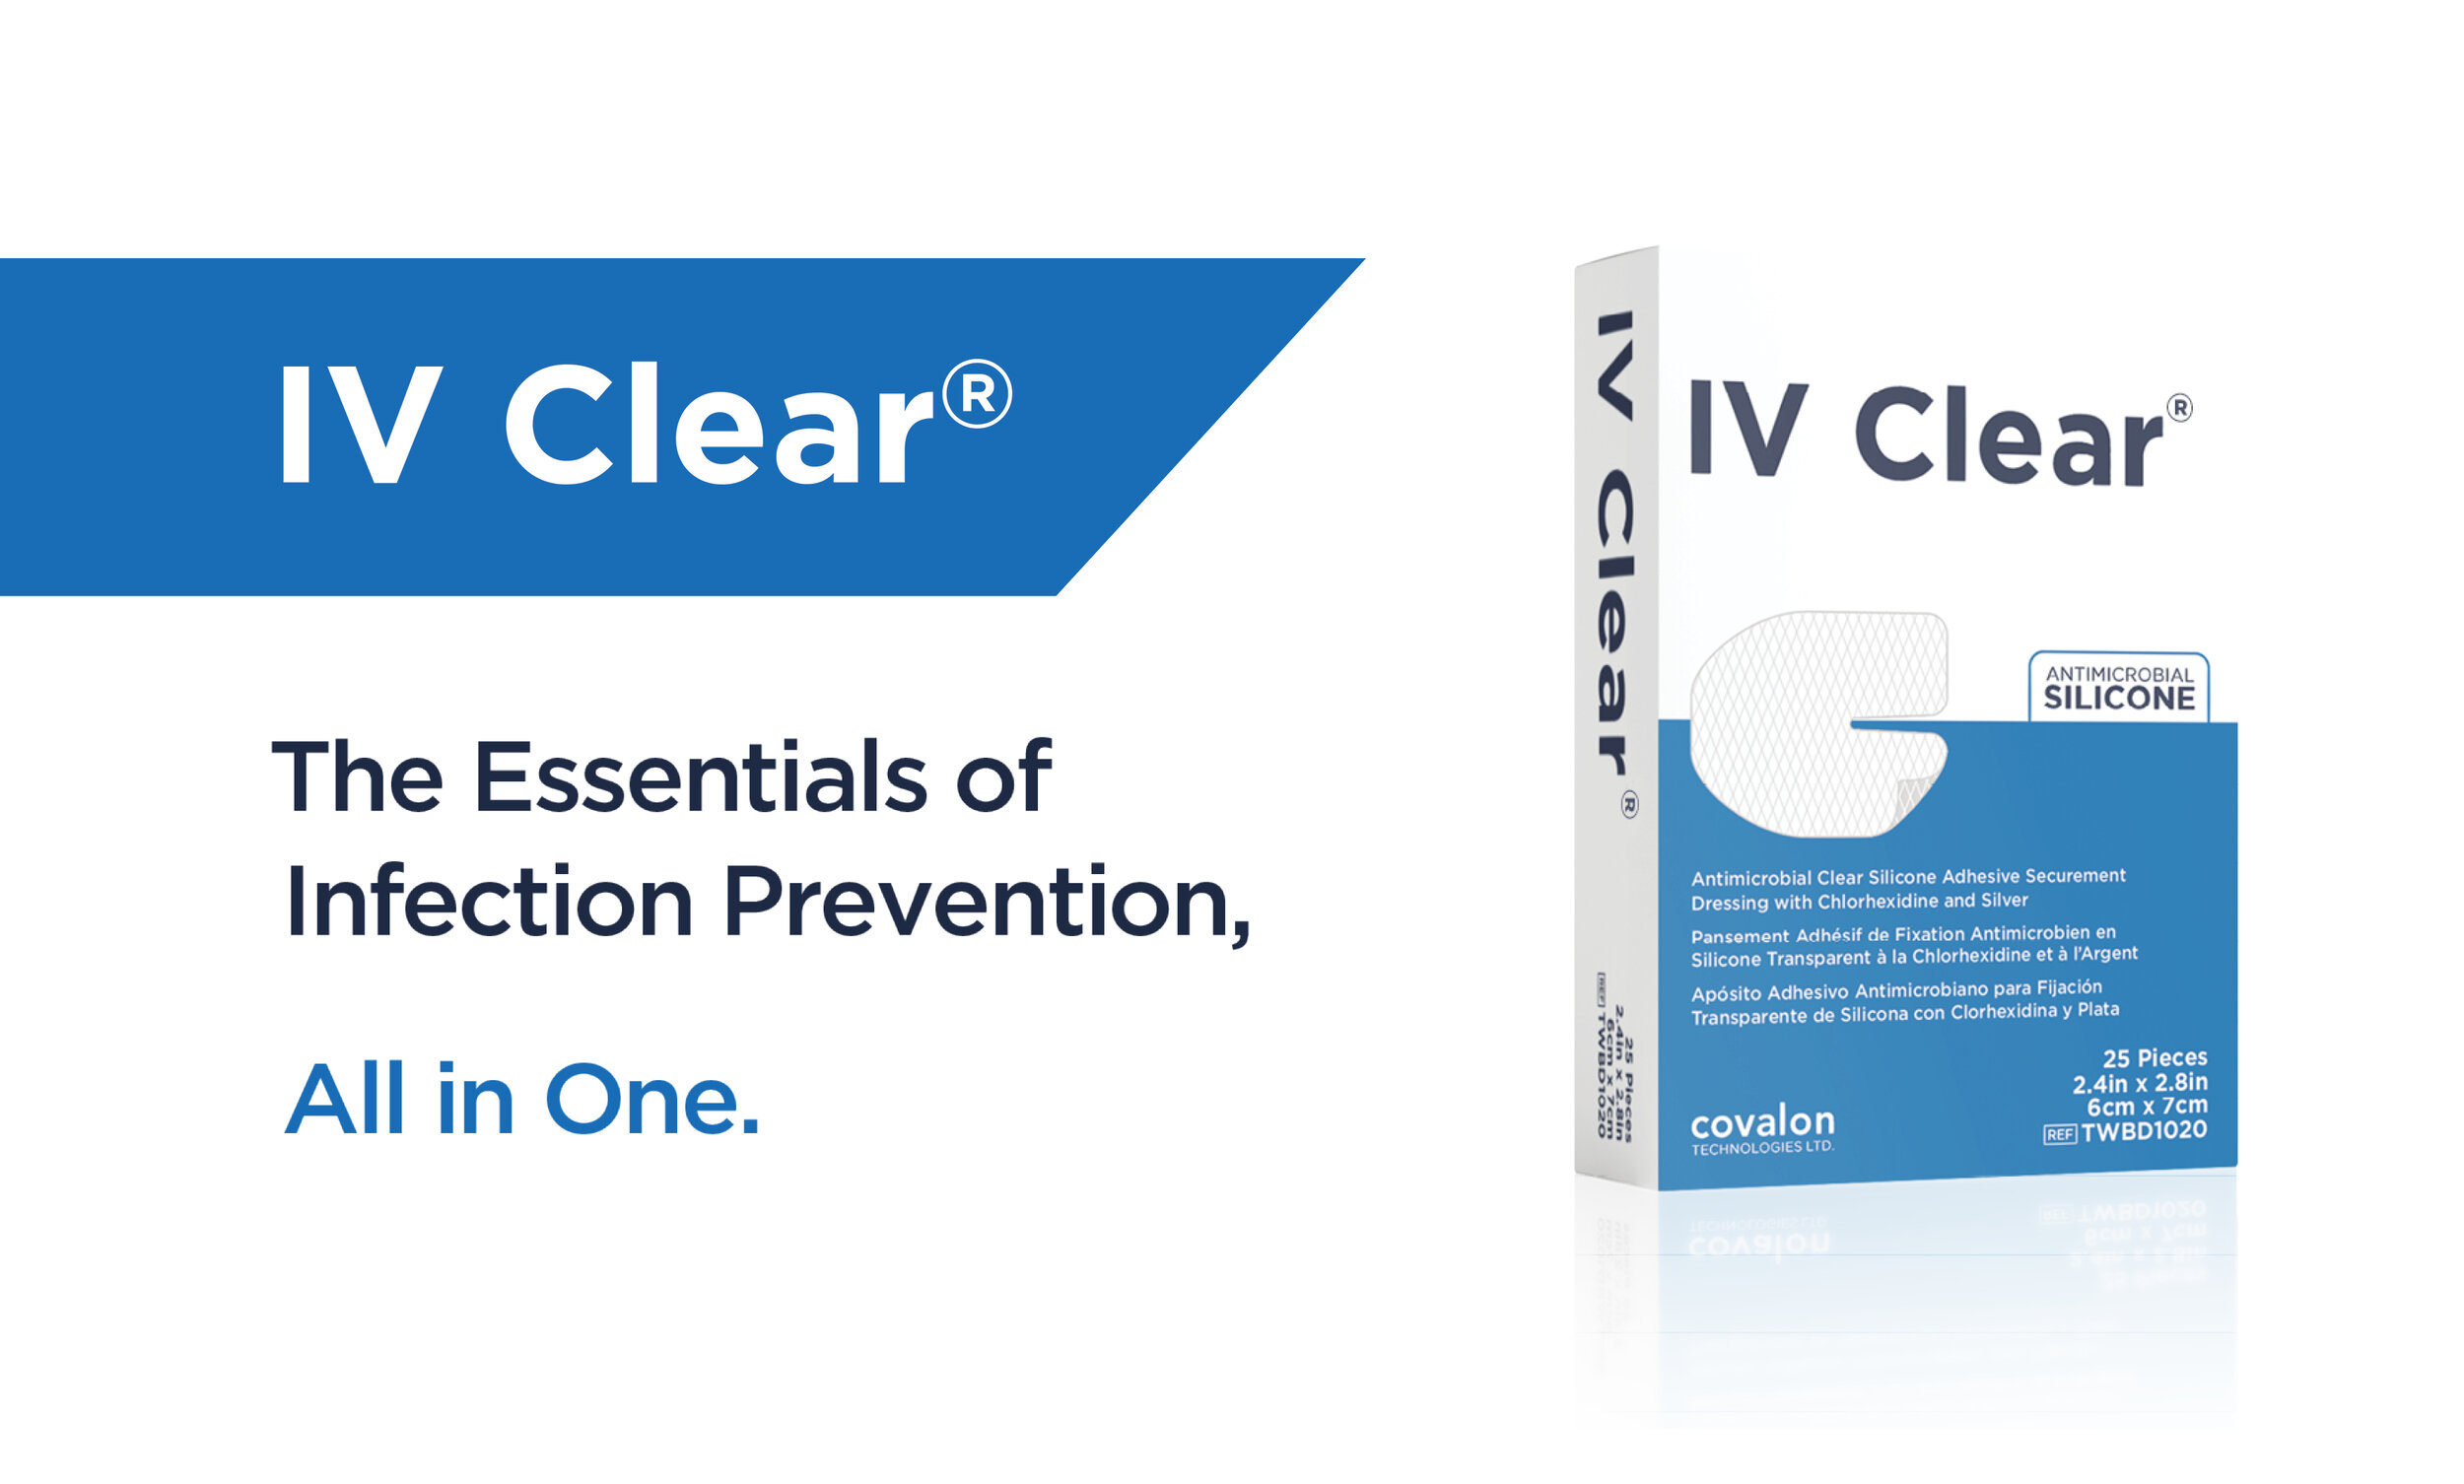 IV Clear Product - Antimicrobial Clear Silicone Adhesive Securement Dressing With Chlorhexidine And Silver